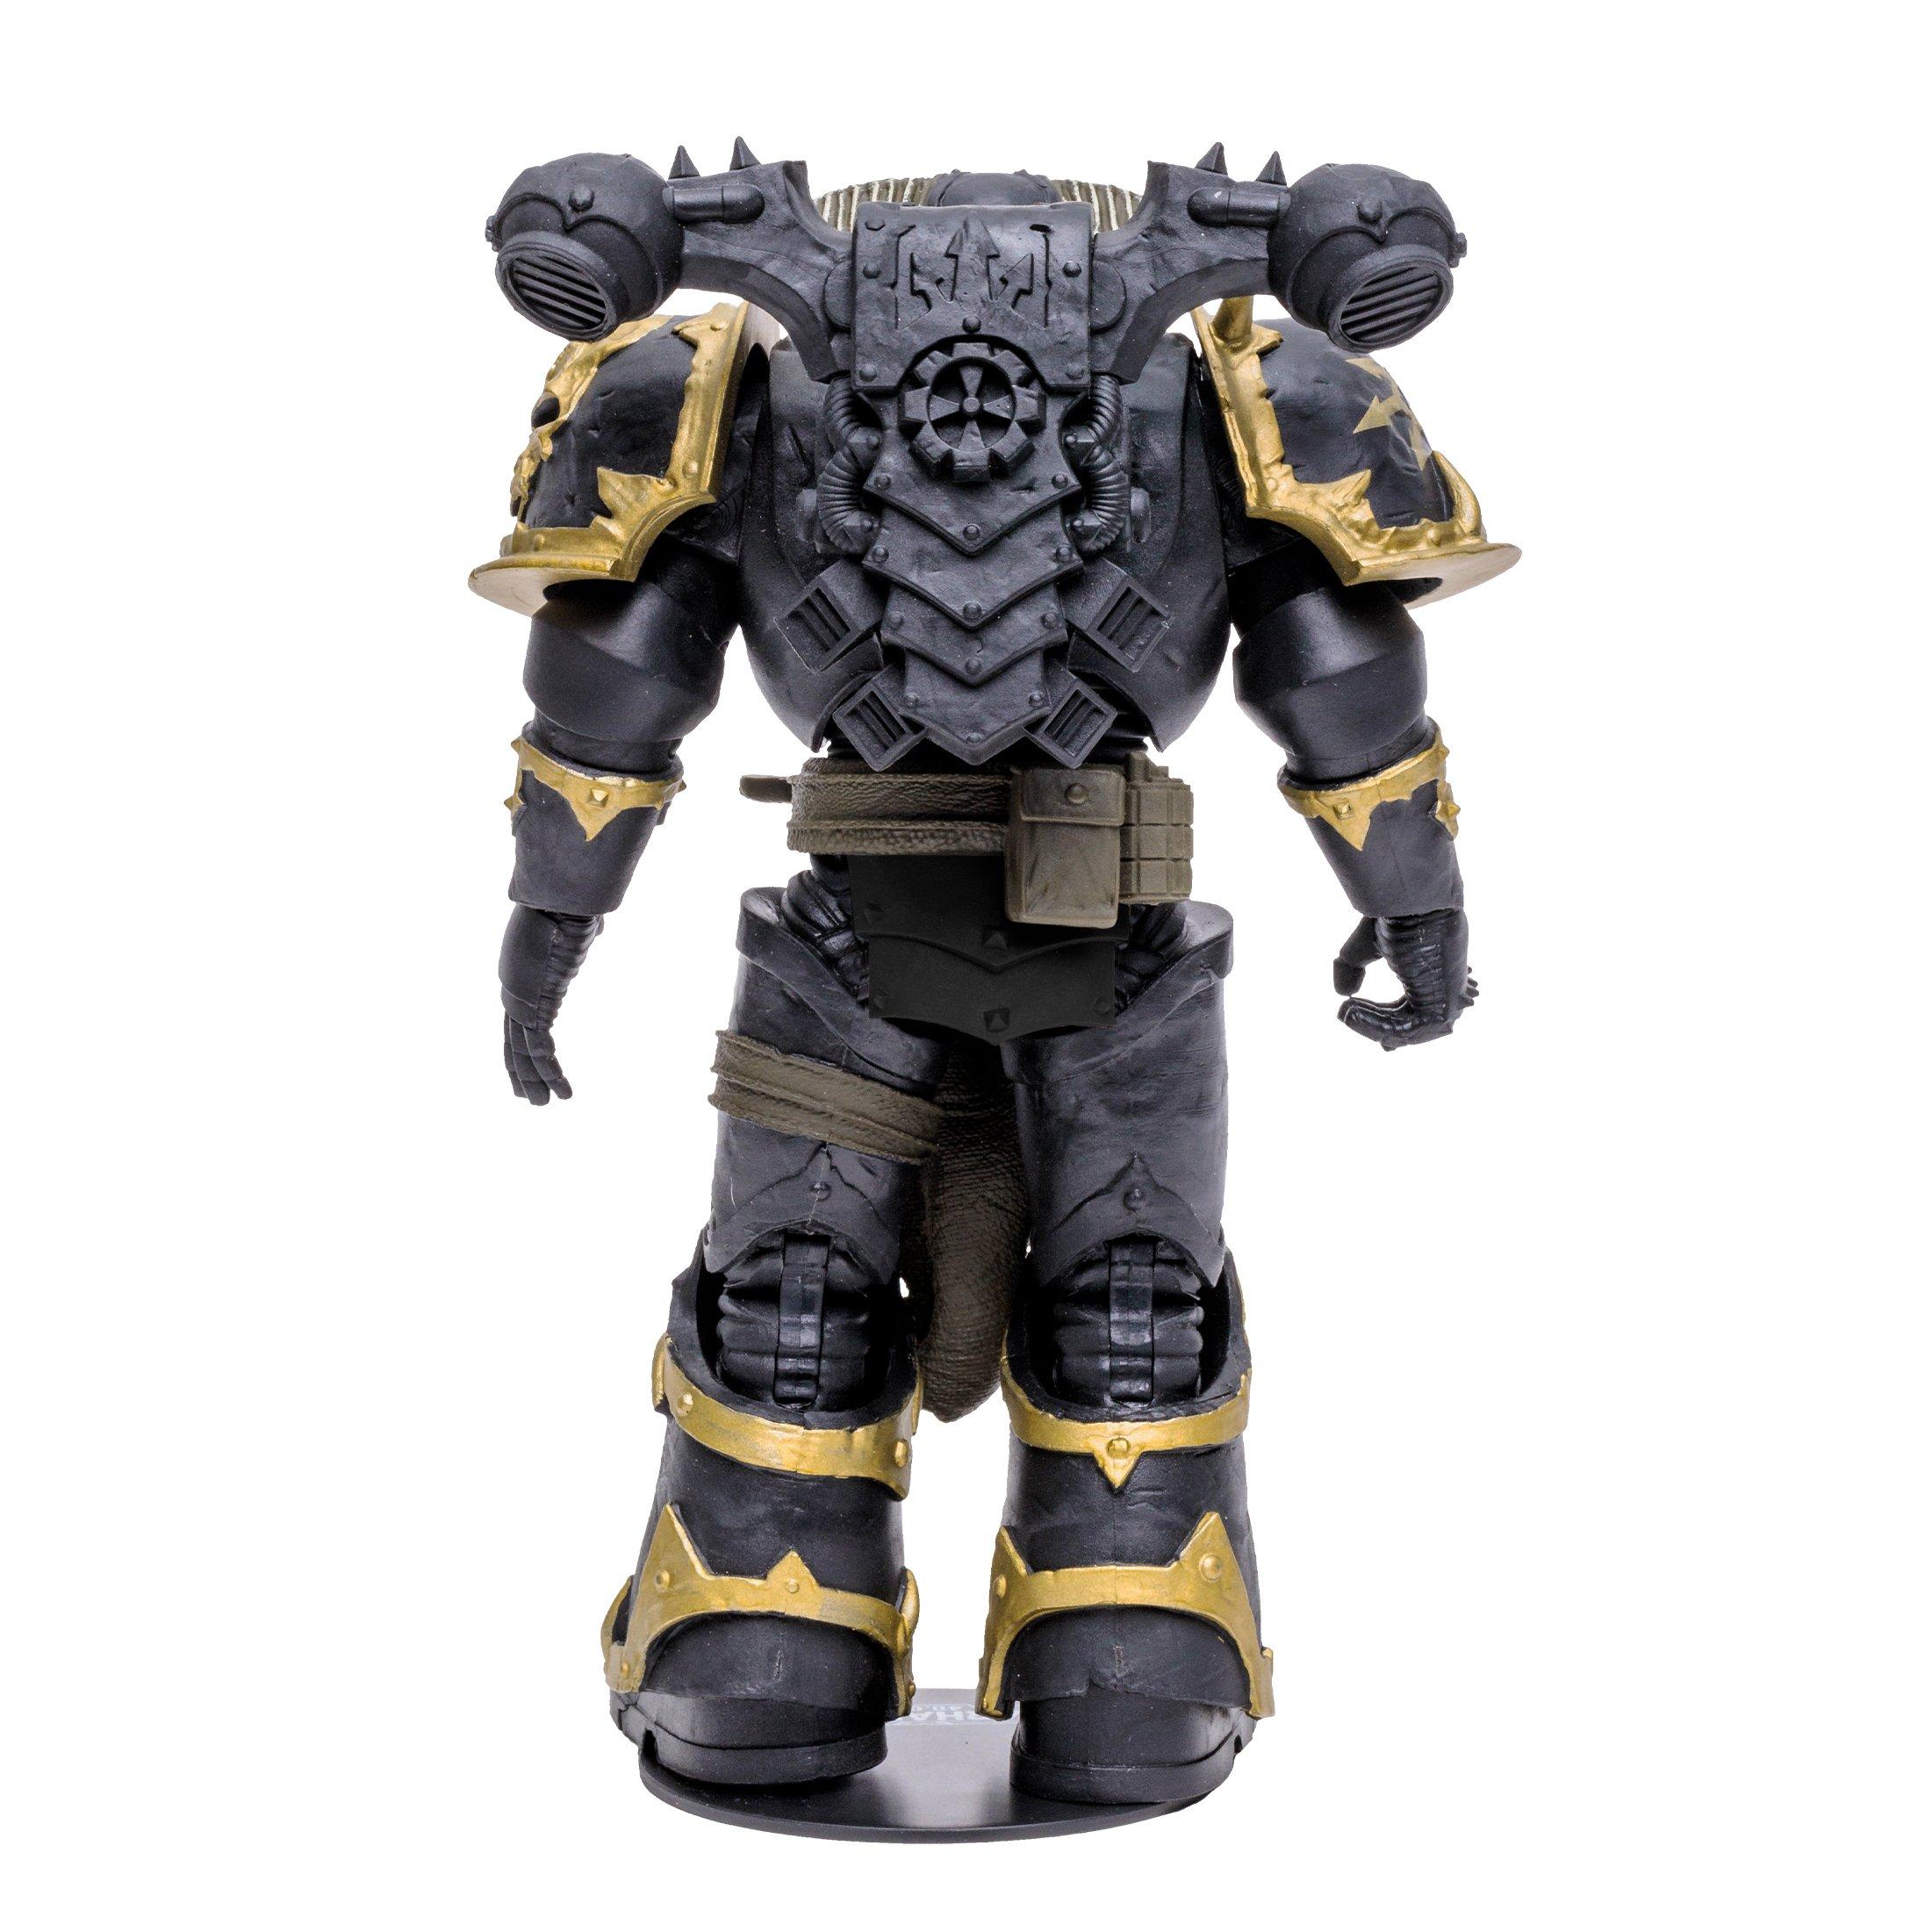 list item 4 of 10 McFarlane Toys Warhammer 40,000 Chaos Space Marine 7-in Scale Action Figure